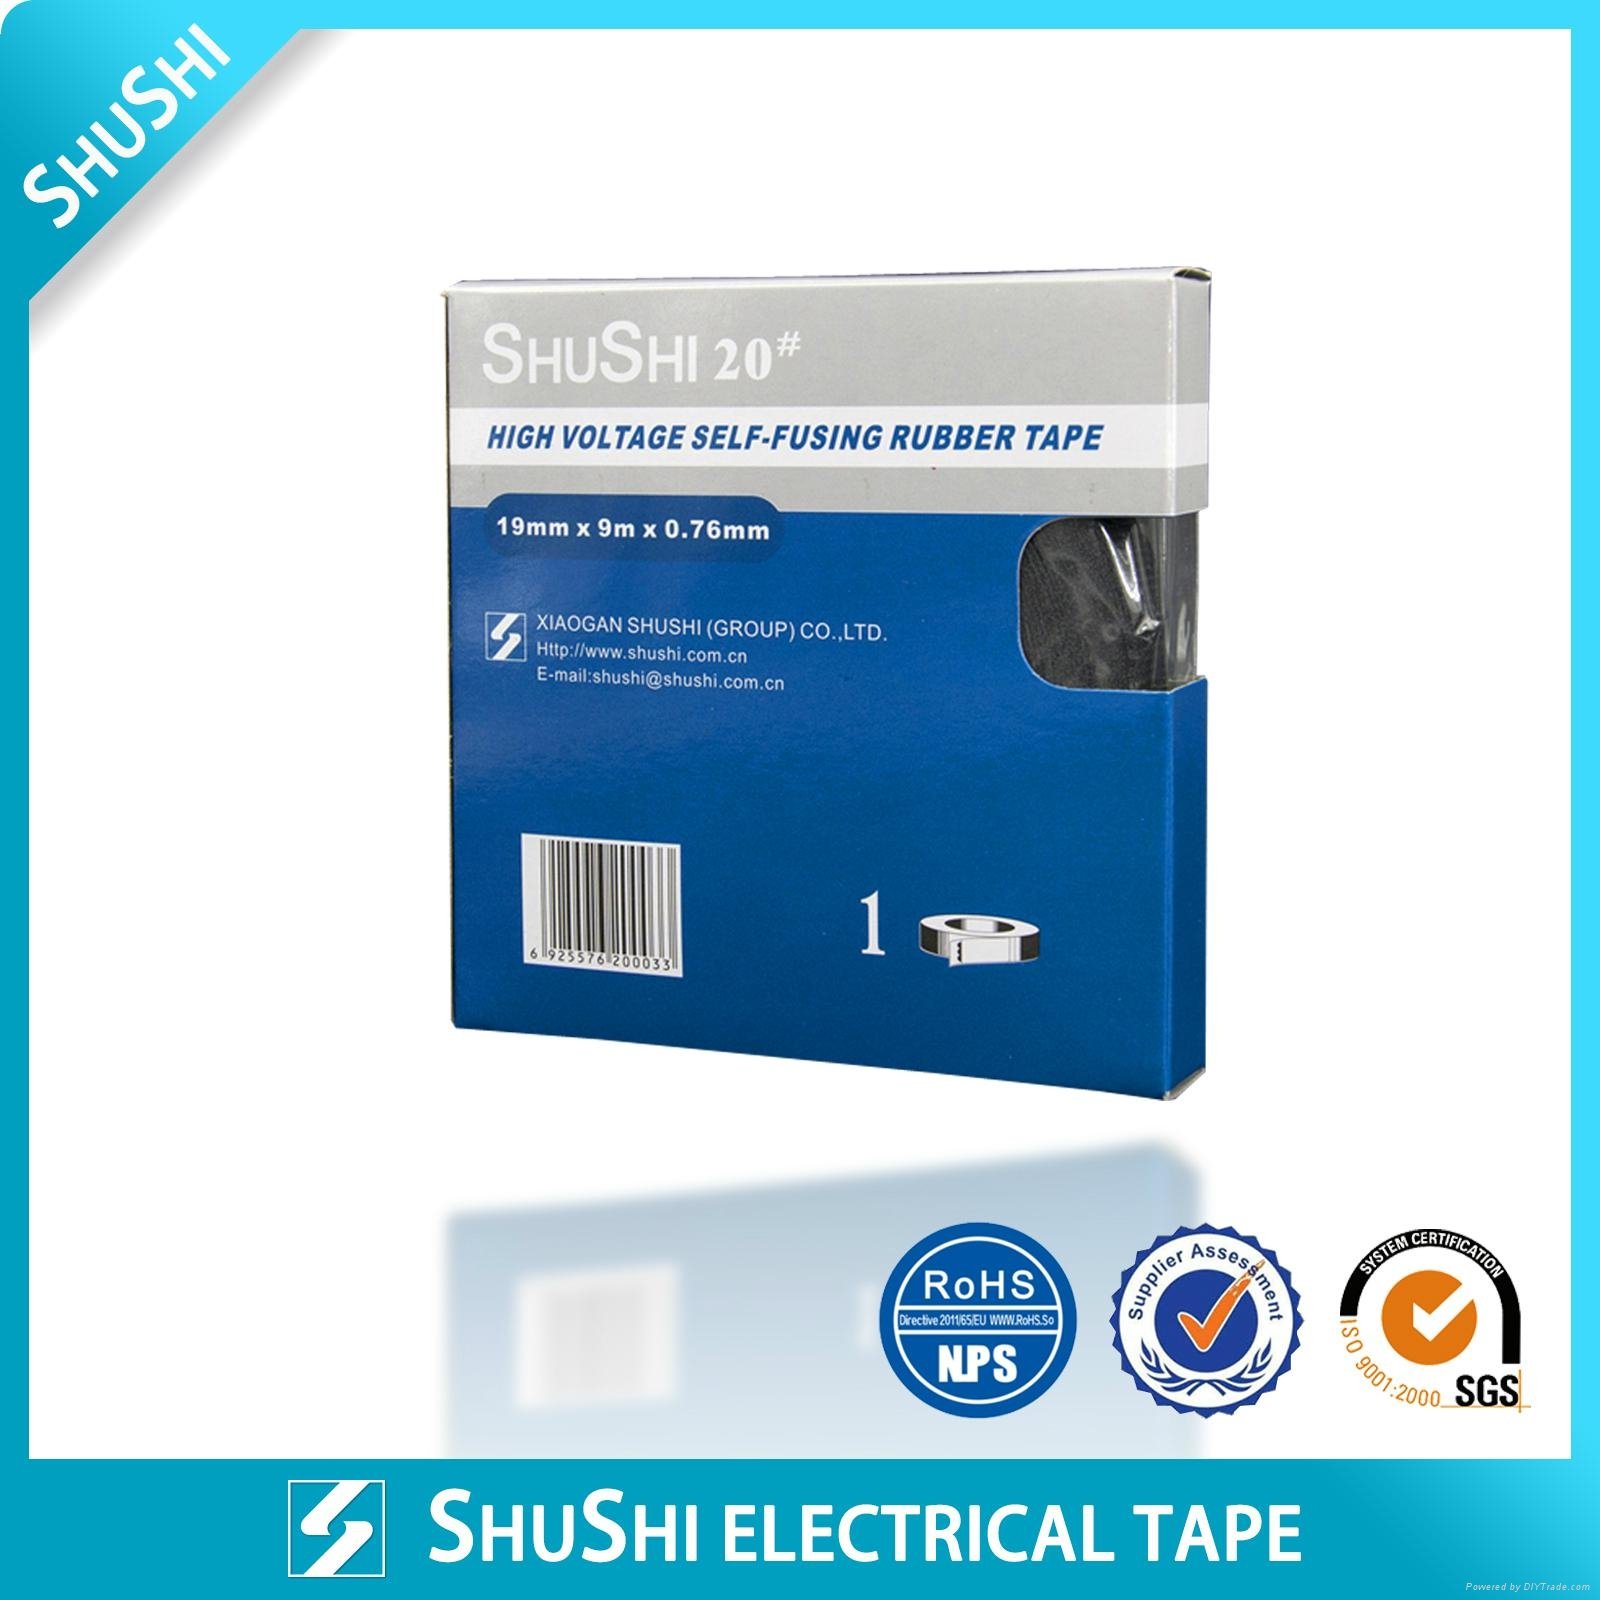 High Voltage Self-Fusing Rubber Tape (20#) 2